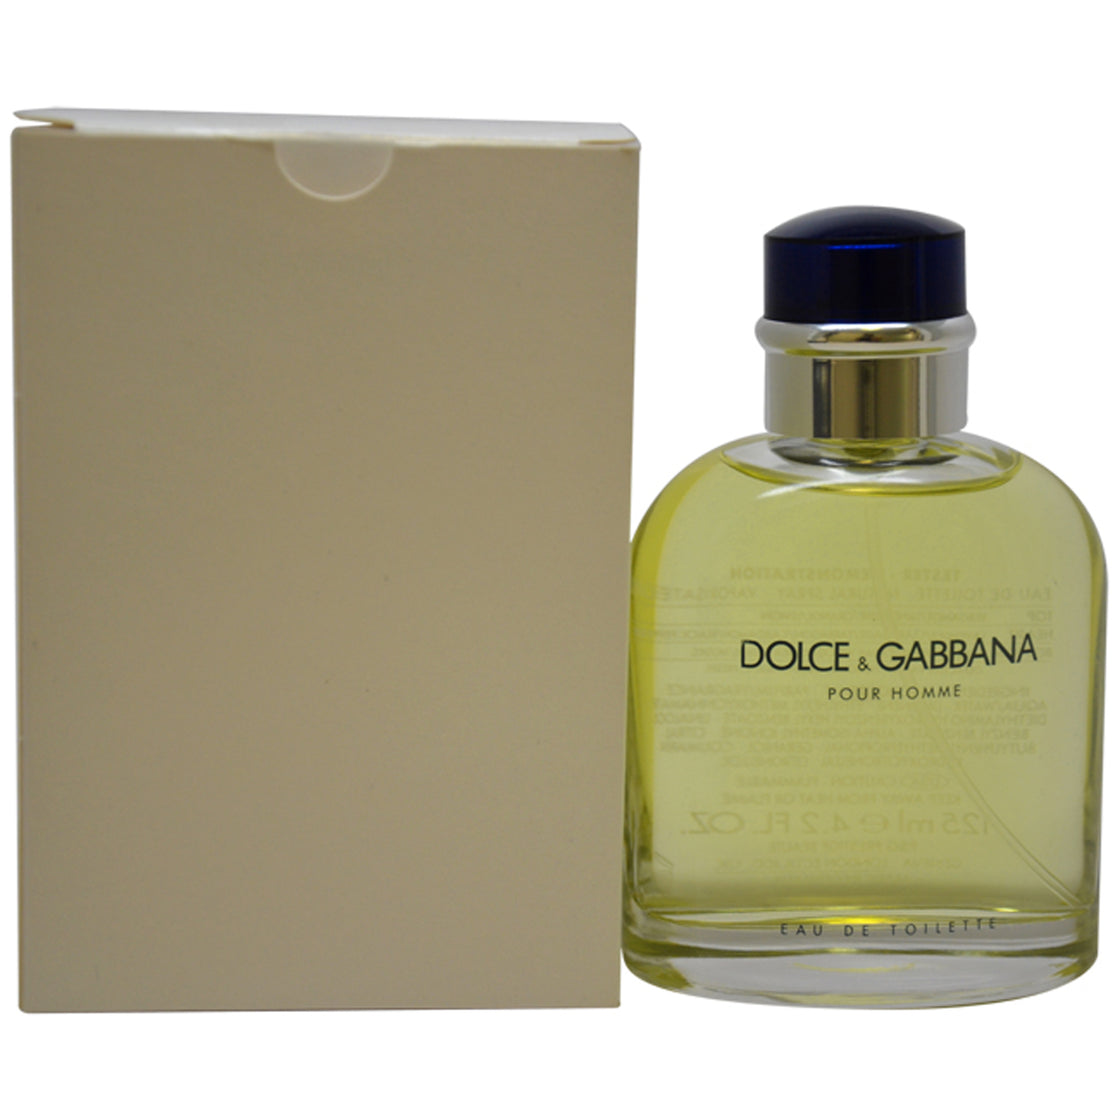 Dolce and Gabbana by Dolce and Gabbana for Men - 4.2 oz EDT Spray (Tester)